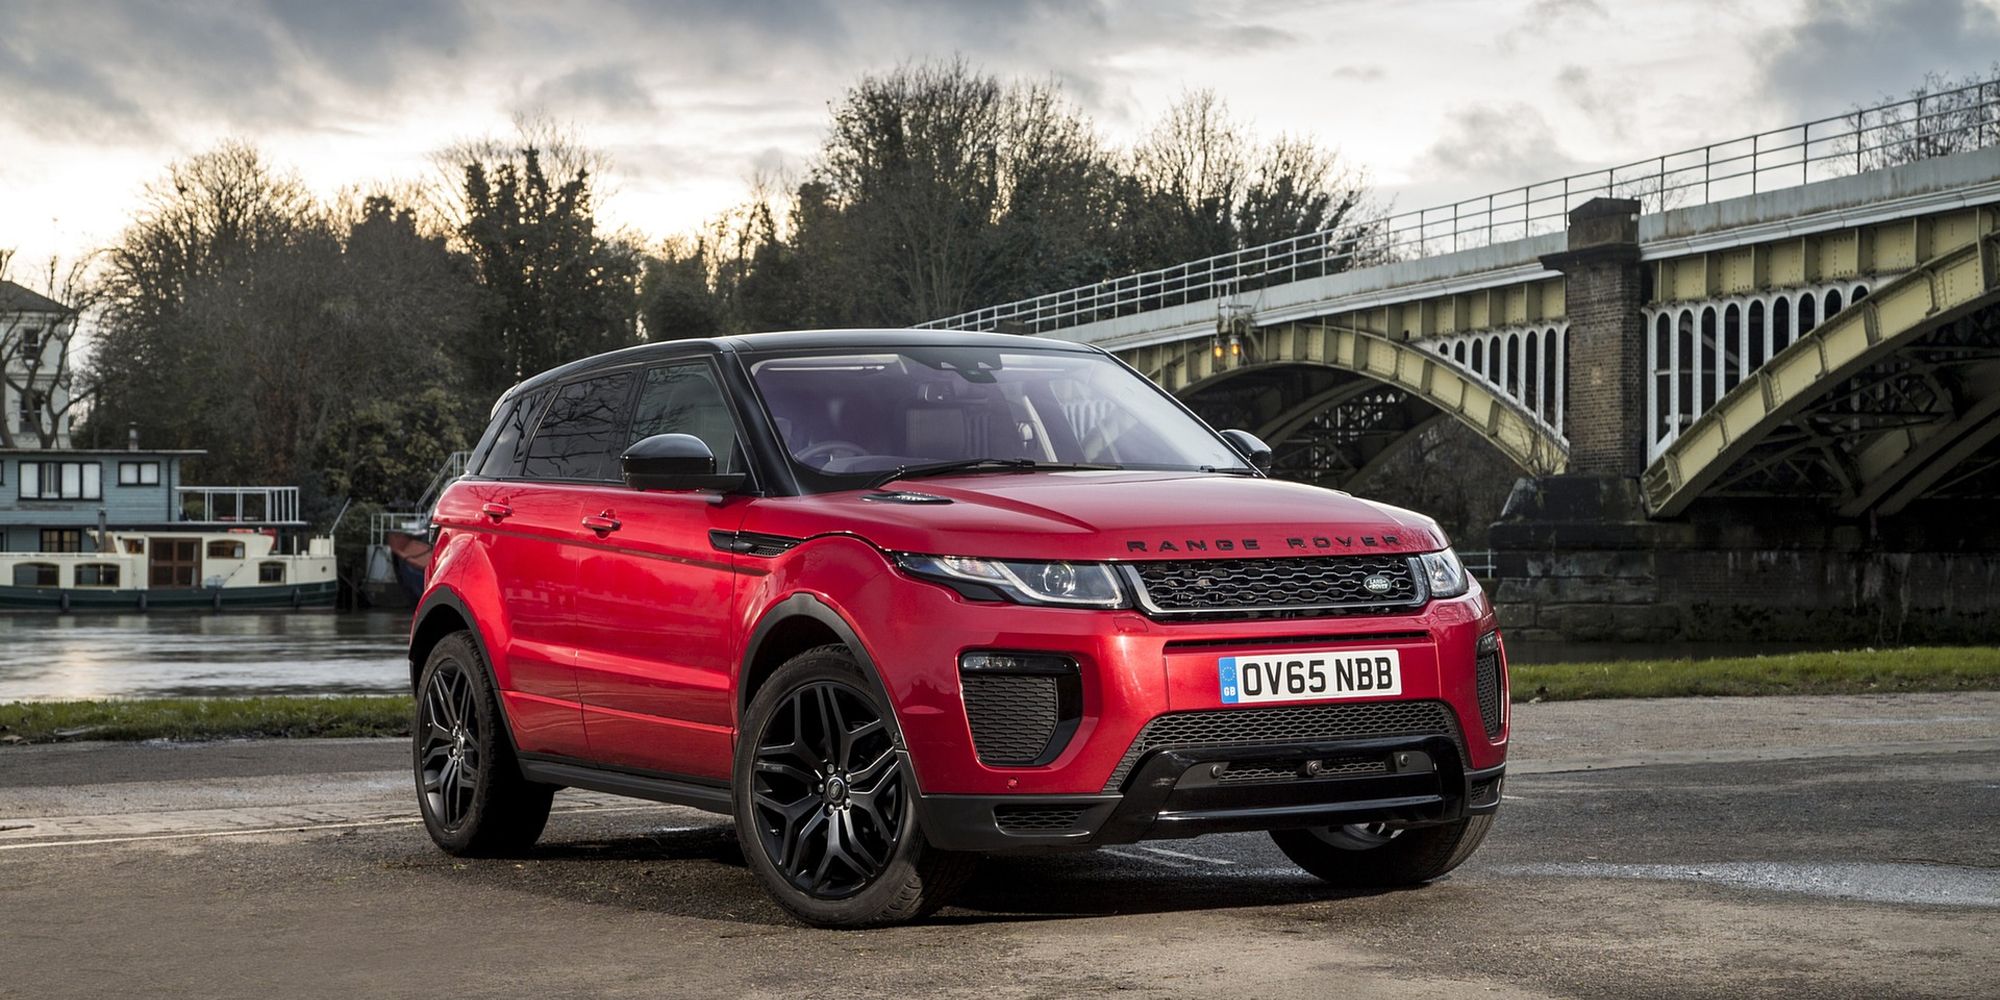 The front of a red Evoque